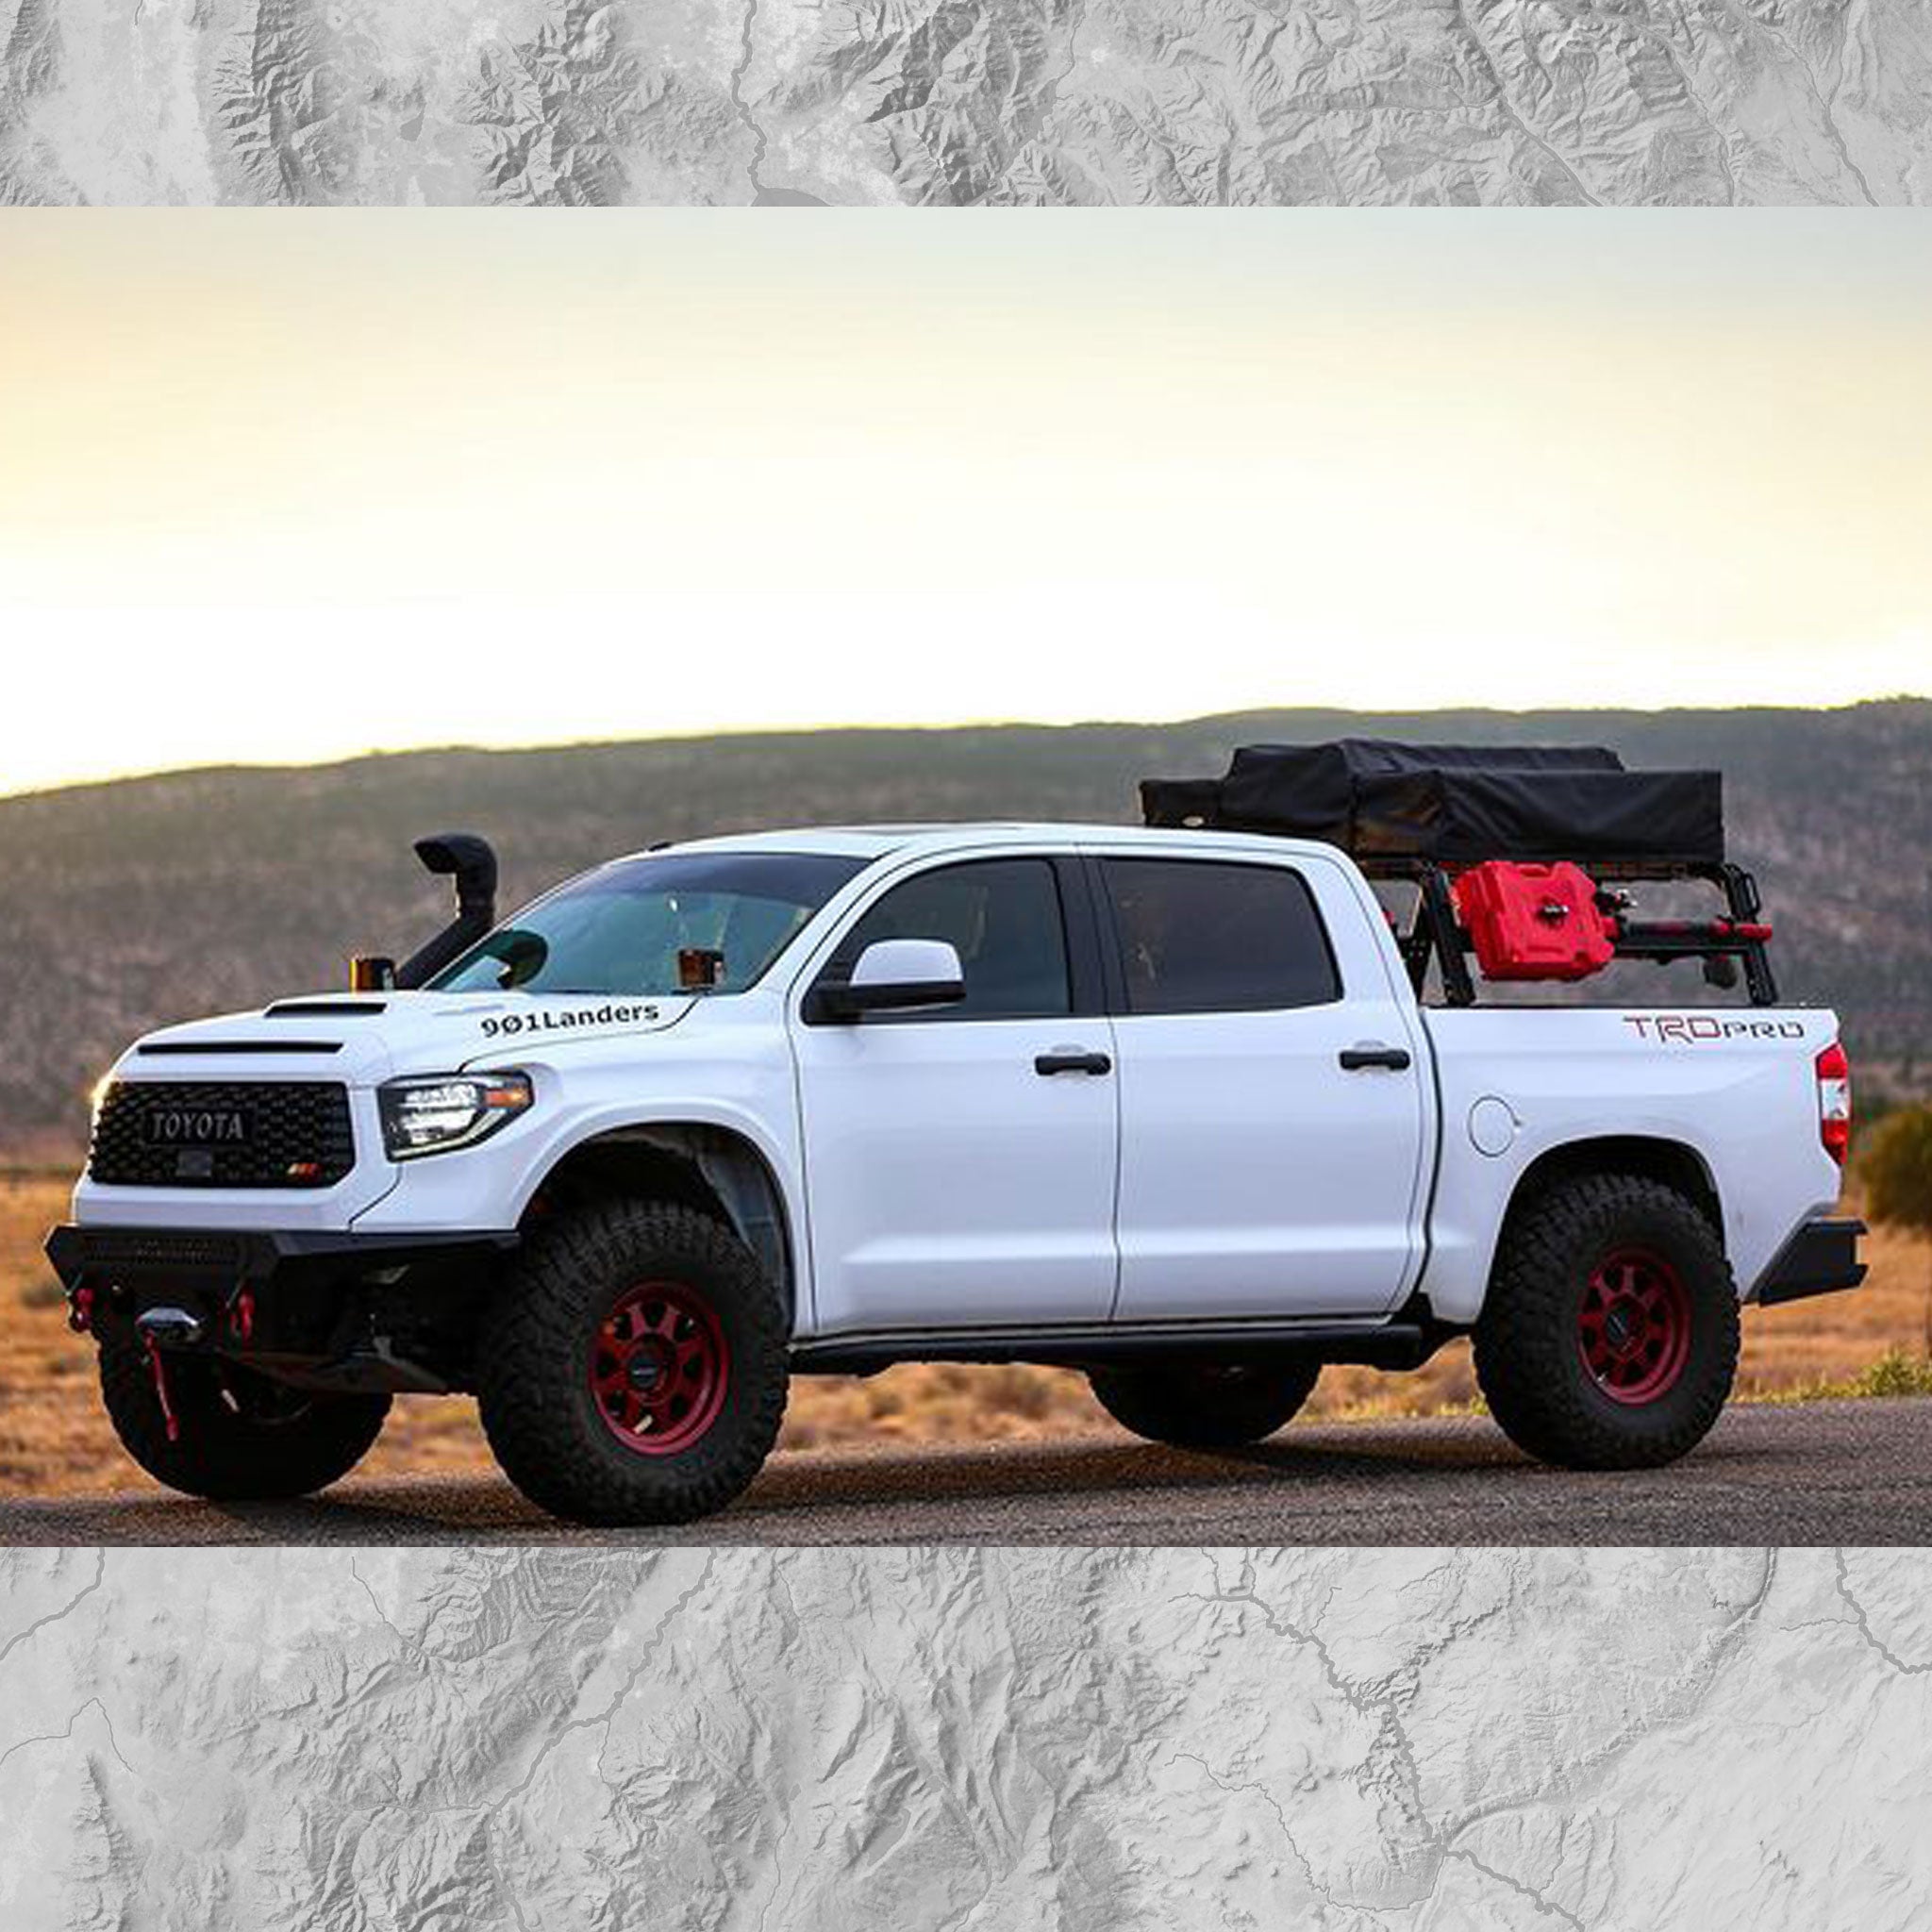 Toyota Tundra with Xtrusion Overland XTR1 Bed Rack with mounted roof top tent and RotoPax.